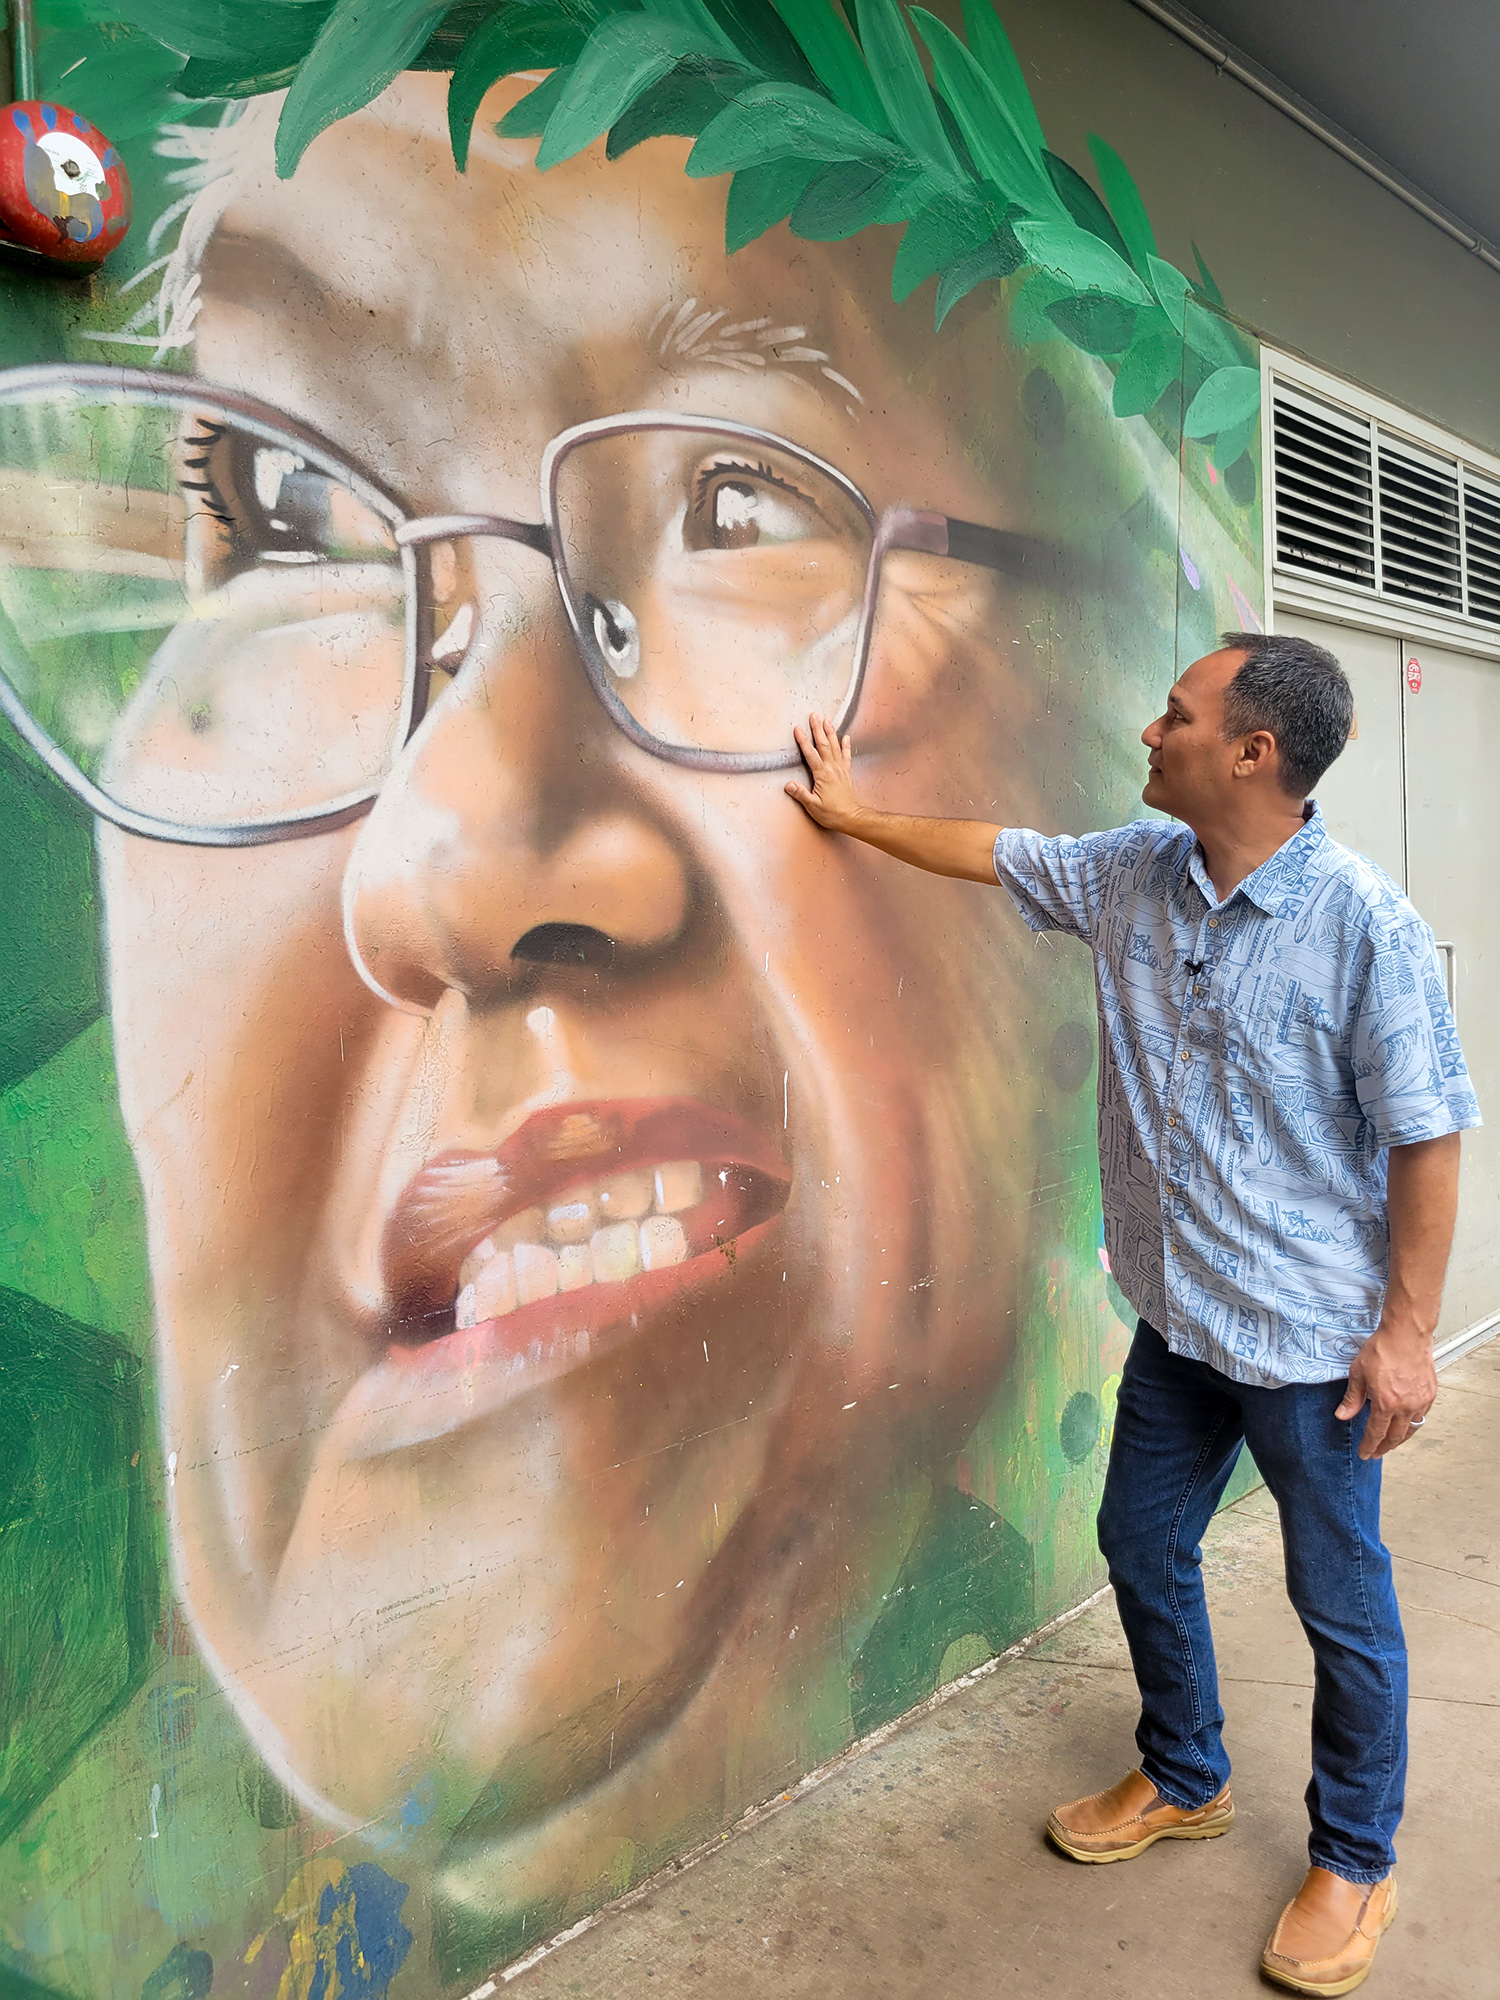 Man in a blue shirt and jeans is standing near a wall with a mural painted on it. The mural is the face of the man’s mother. He has his hand placed on the mother’s cheek. 